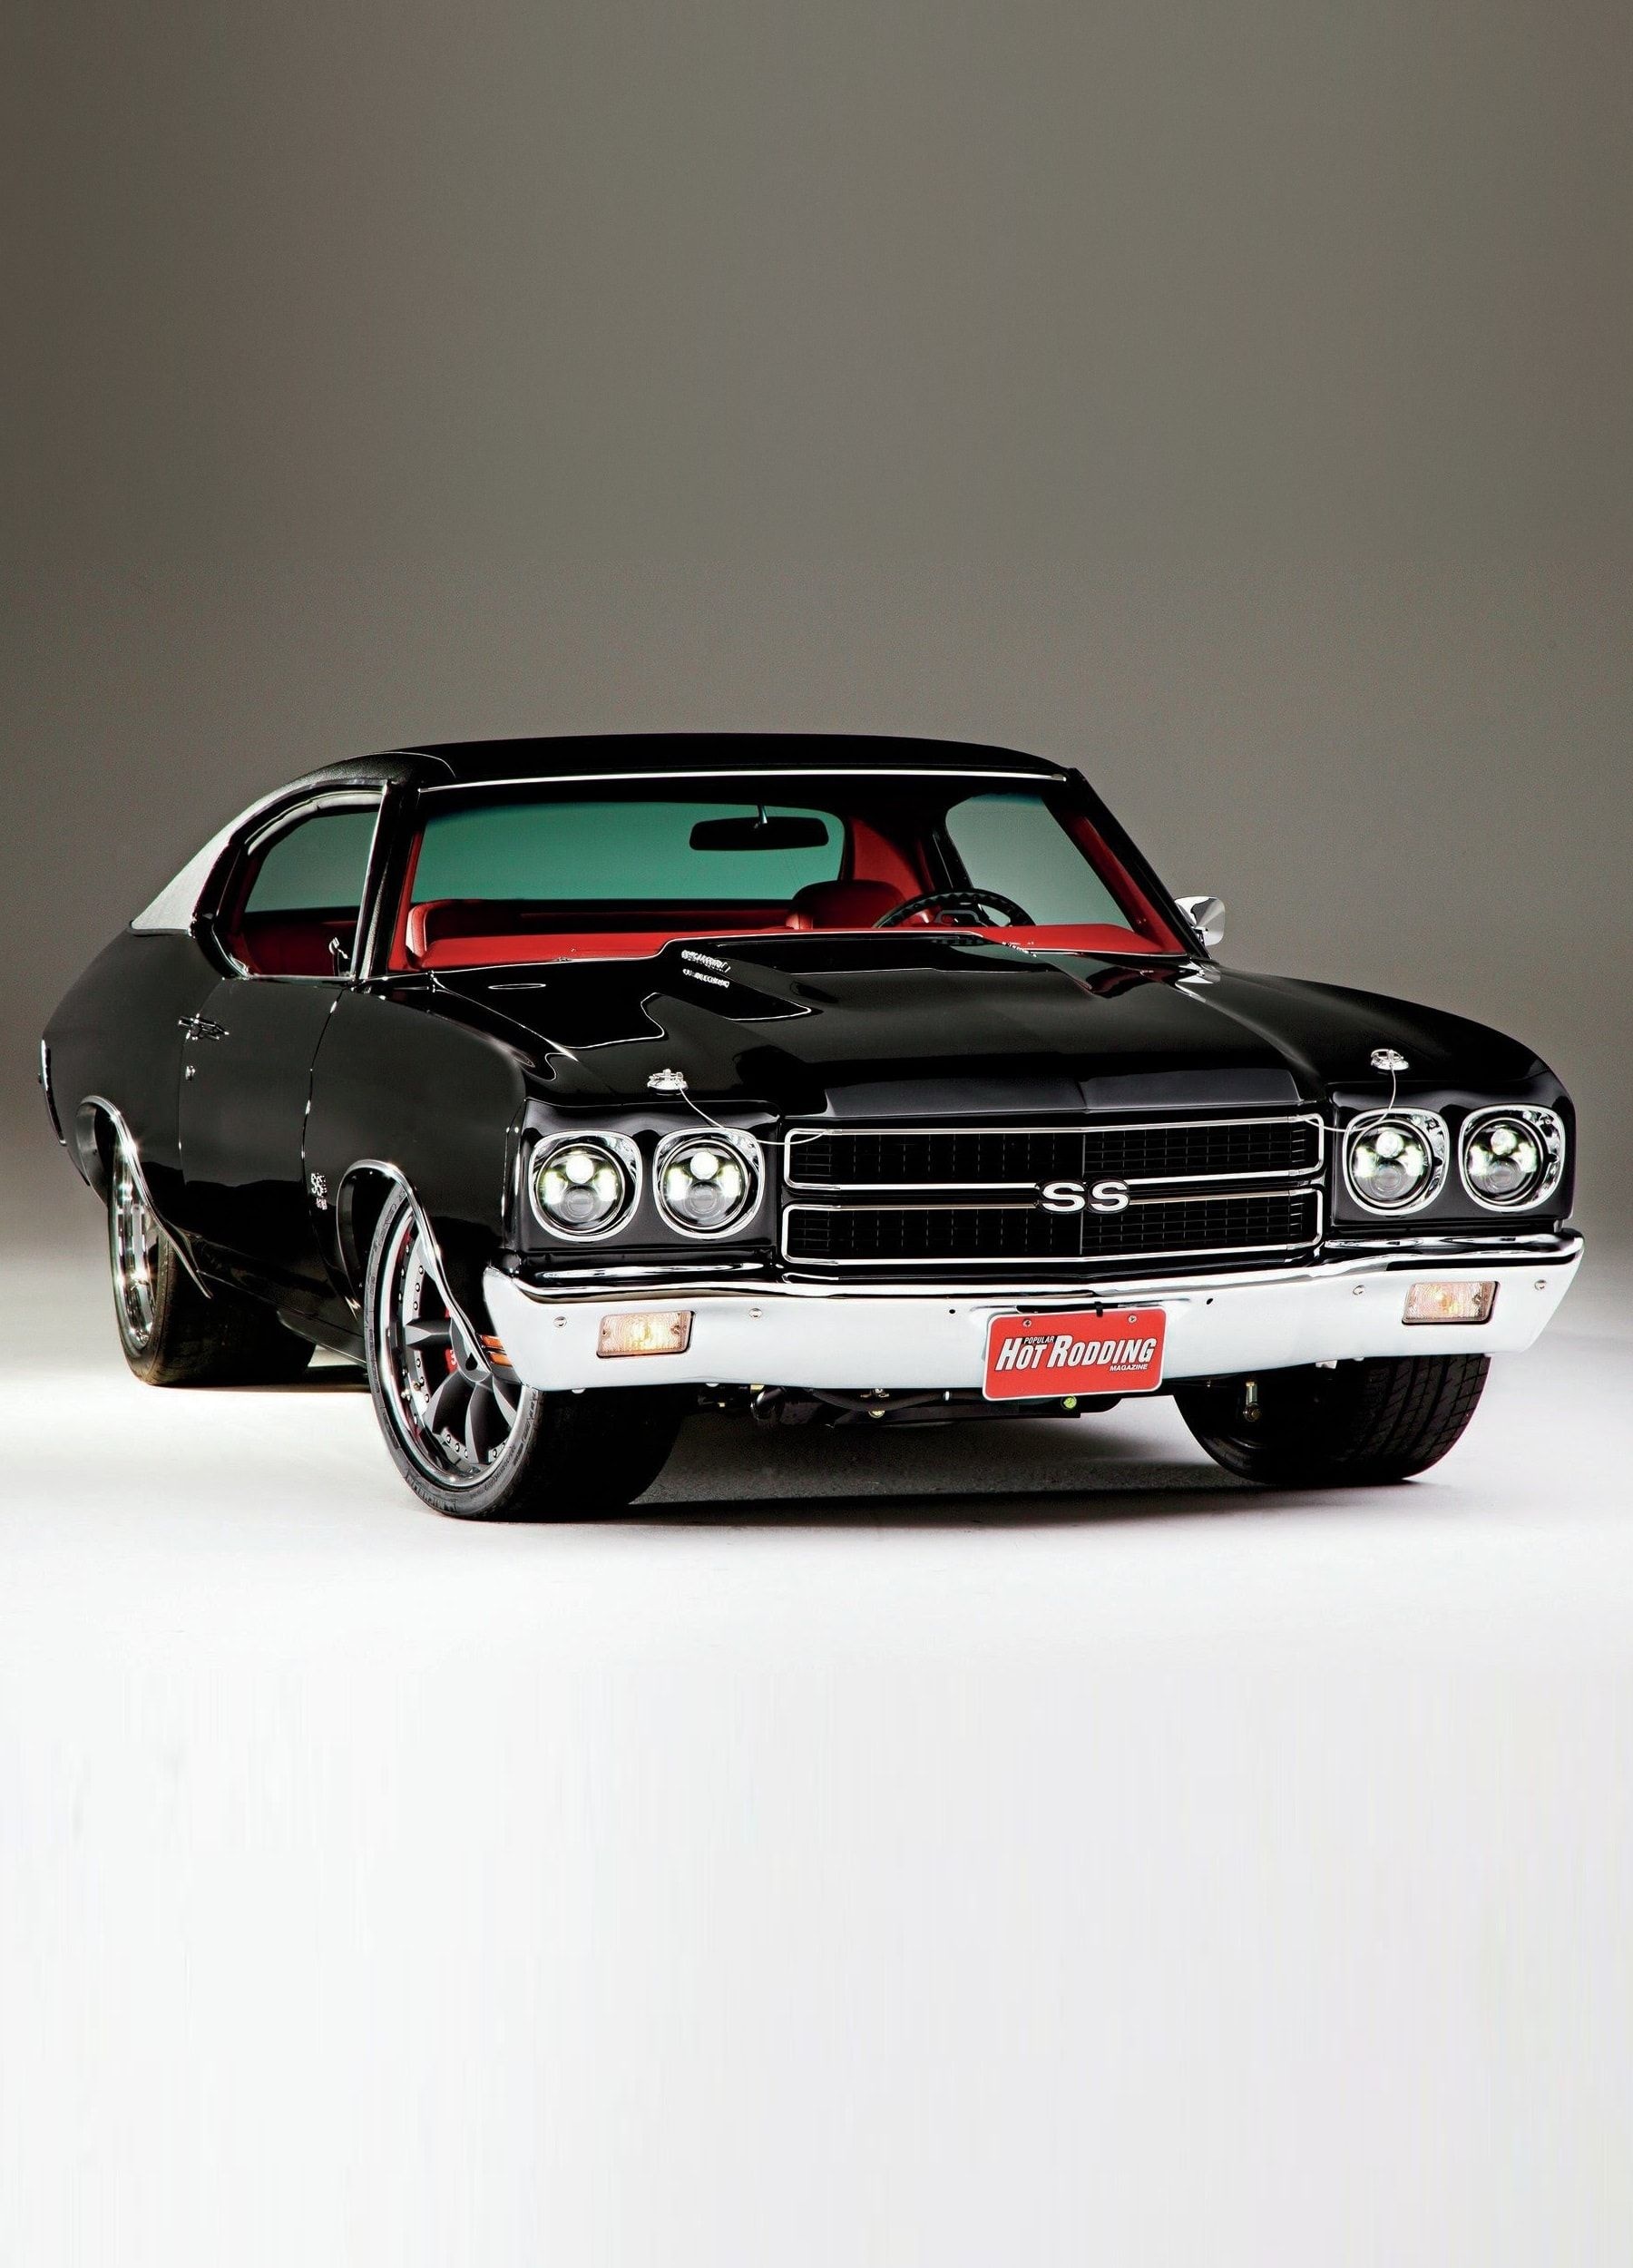 Smartphone Chevelle scene, Vintage car collection, Engineered muscle, Chevelle SS gallery, Auto wallpapers cave, 1800x2500 HD Handy